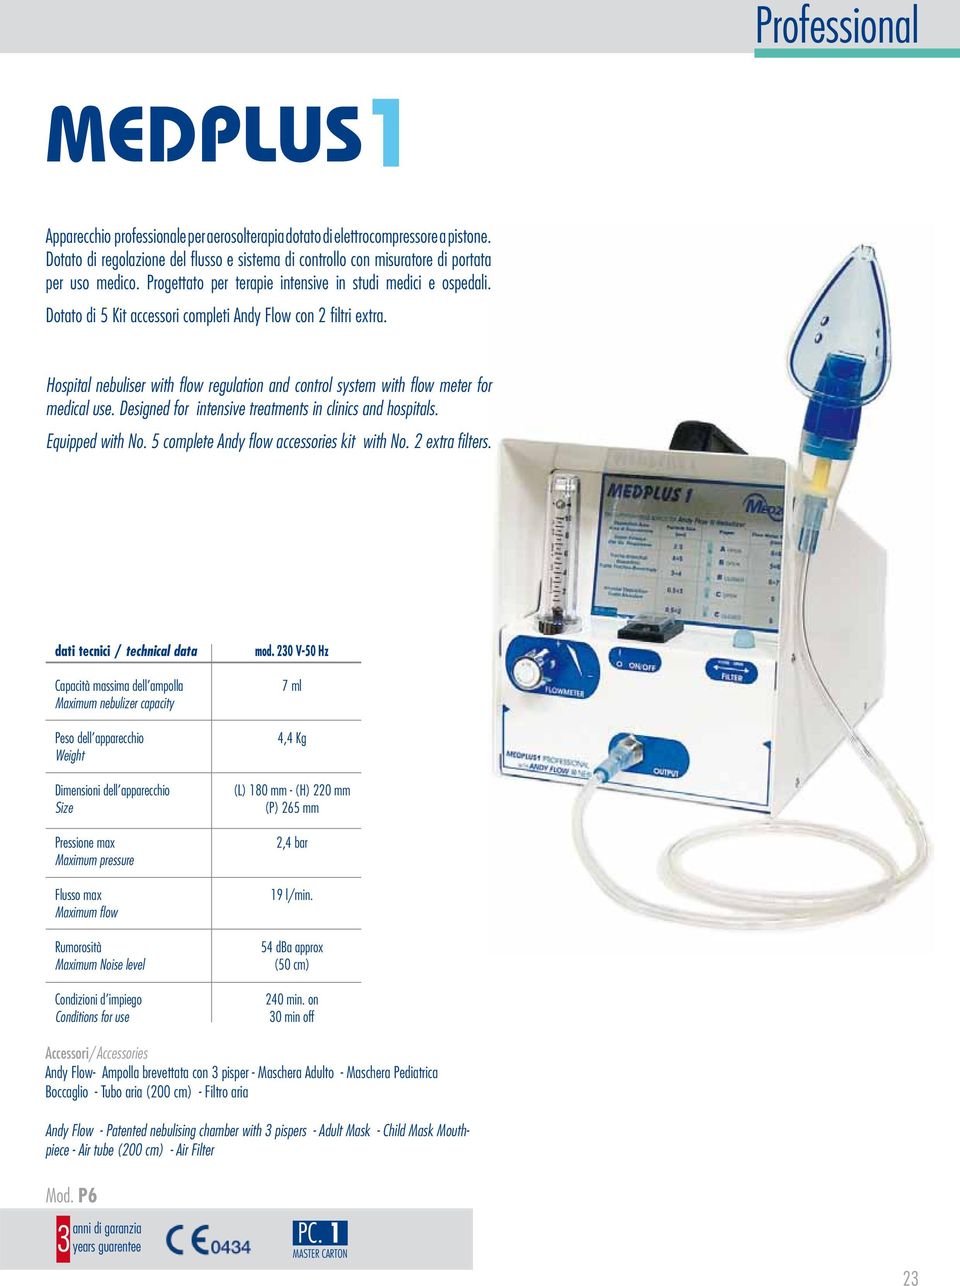 Dotato di 5 Kit accessori completi Andy Flow con 2 filtri extra. Hospital nebuliser with flow regulation and control system with flow meter for medical use.